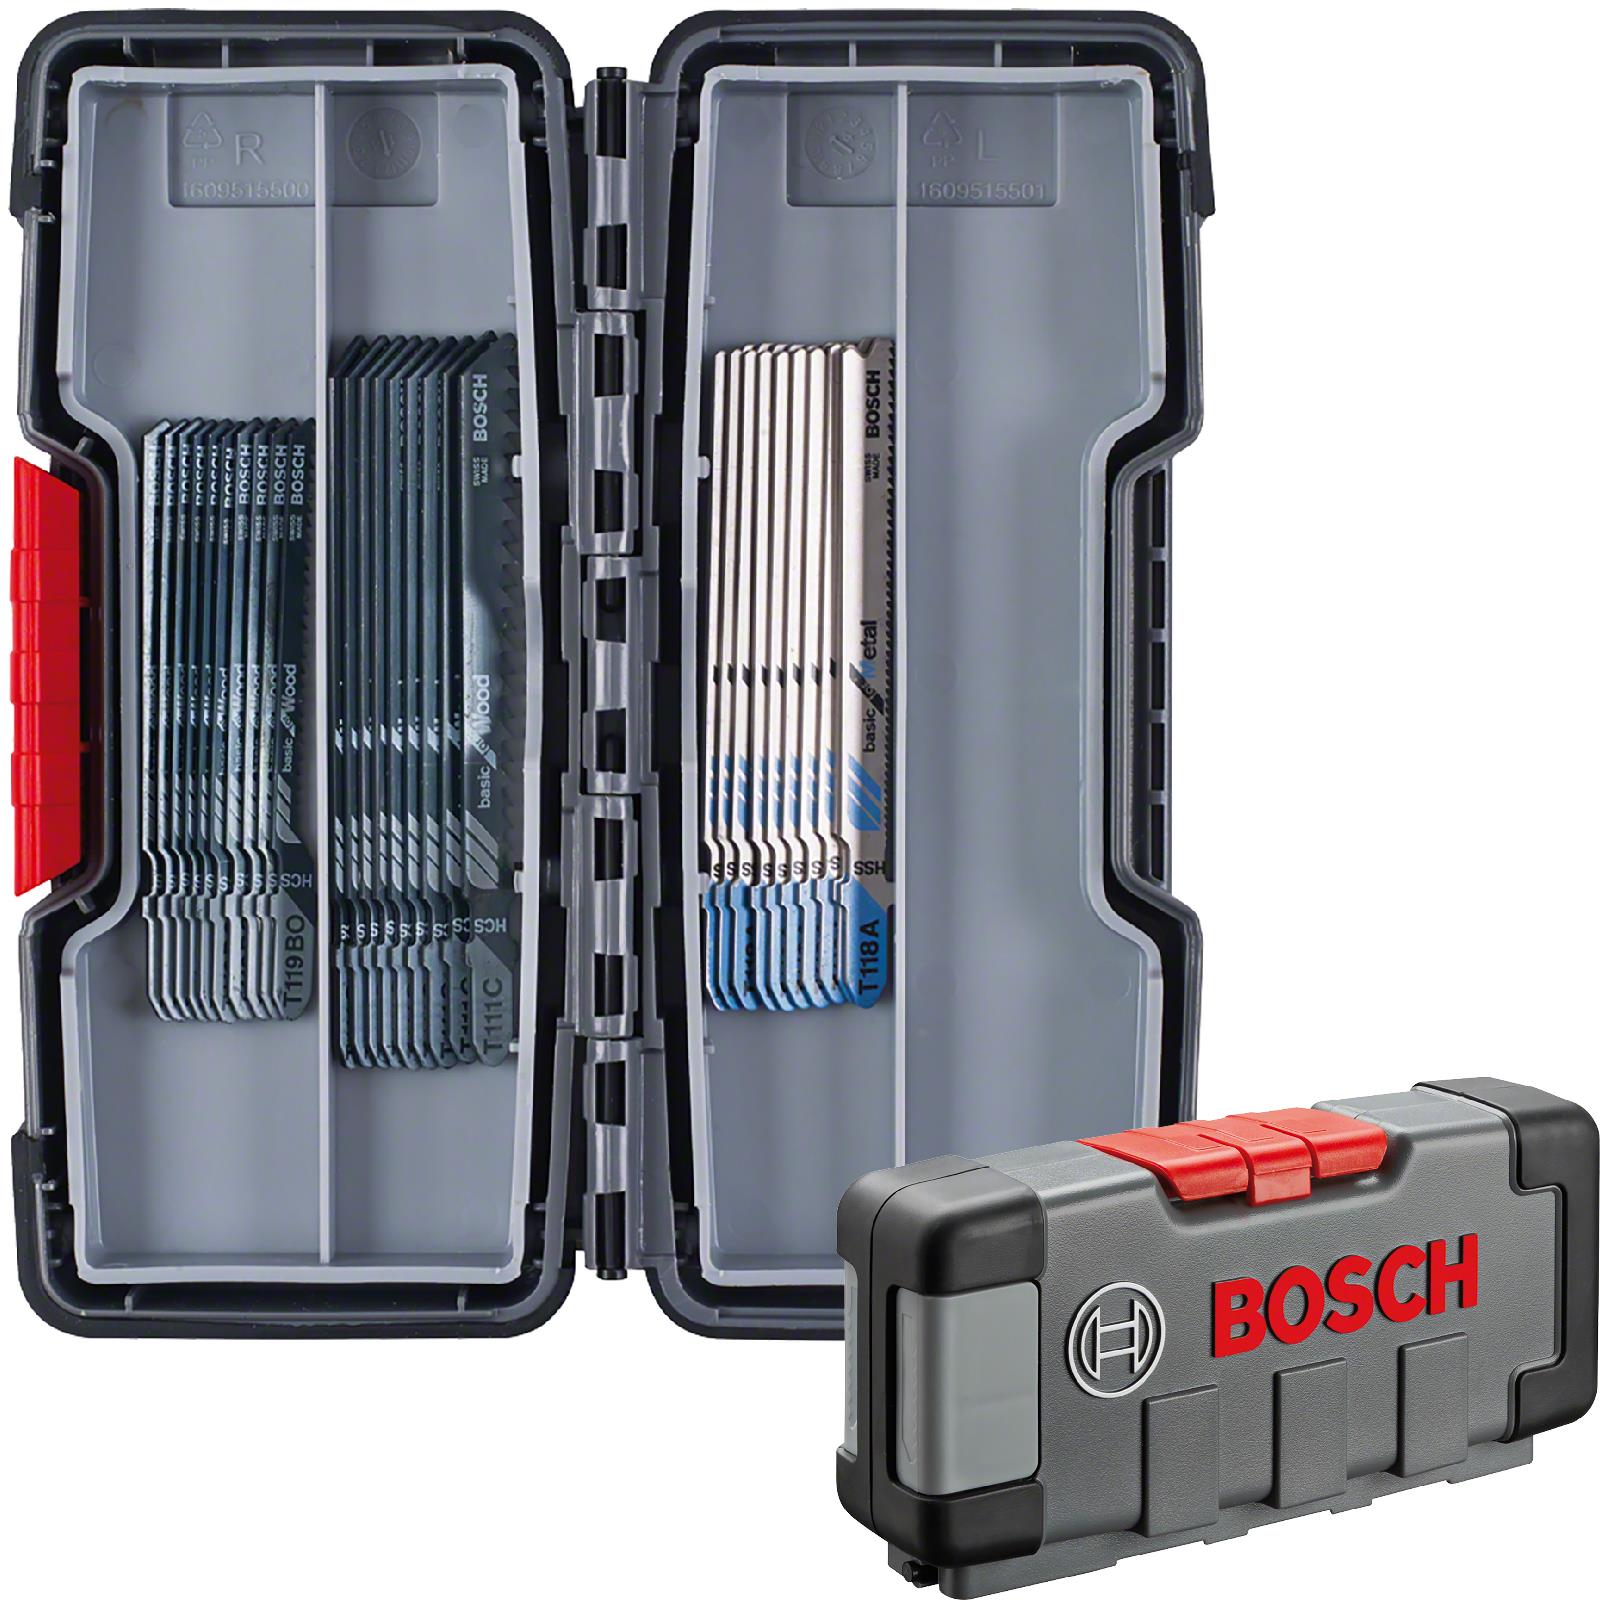 Bosch Jigsaw Blade Set 30 Piece in Tough Box for Wood and Metal